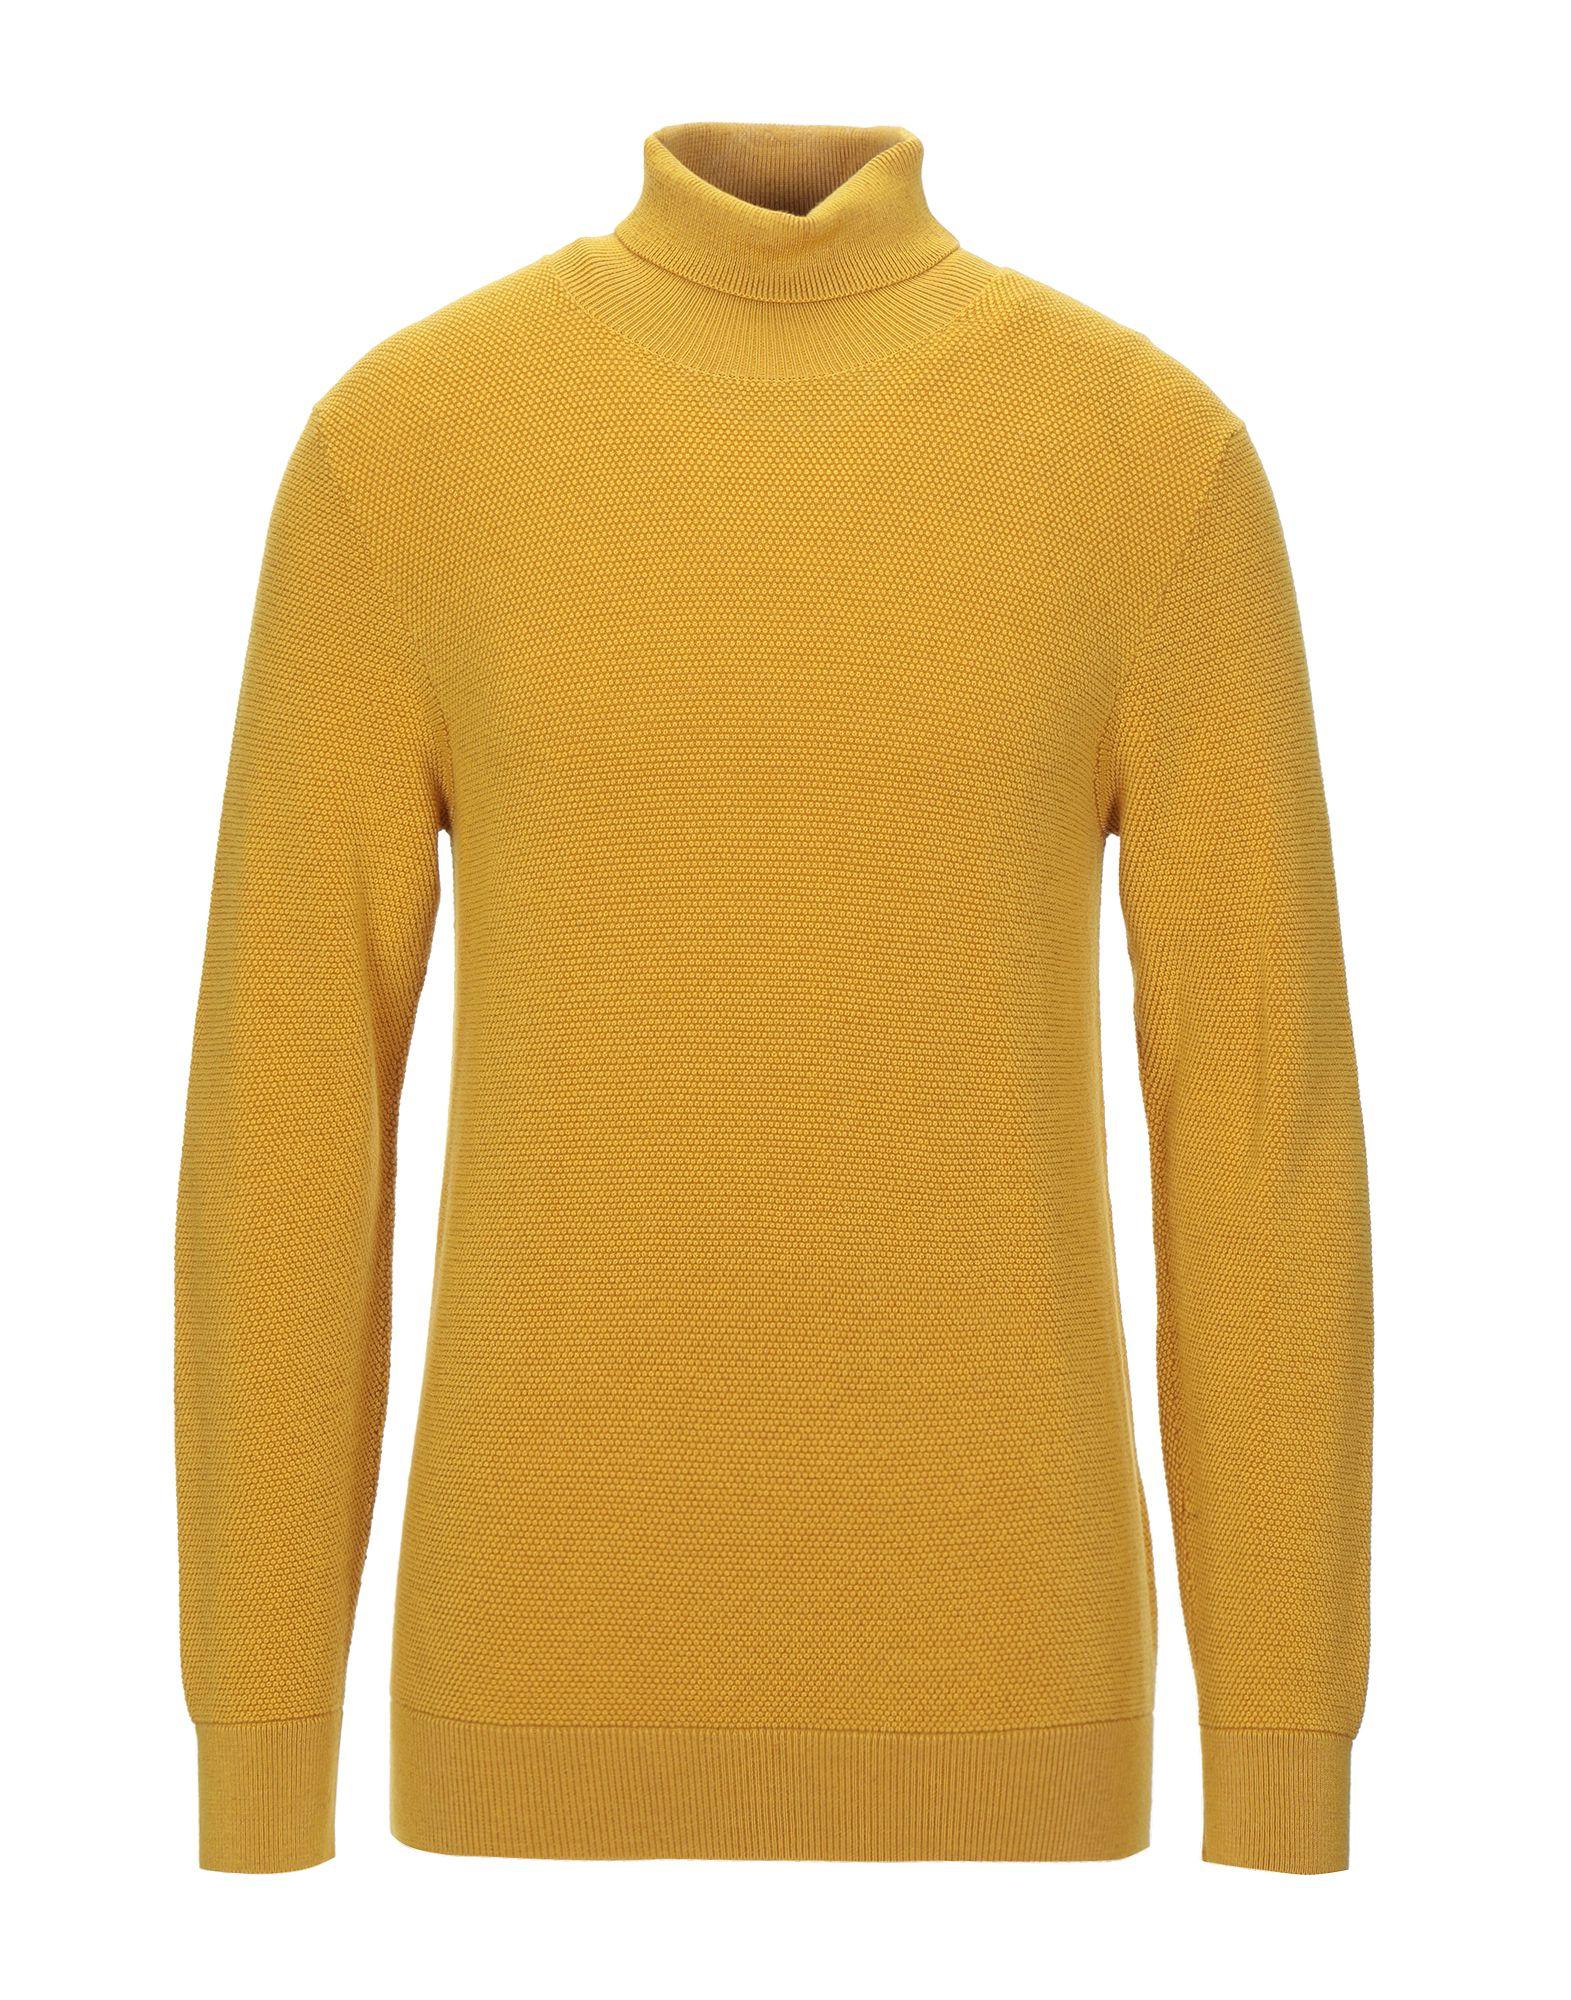 Circolo 1901 Wool Turtleneck in Yellow for Men - Lyst